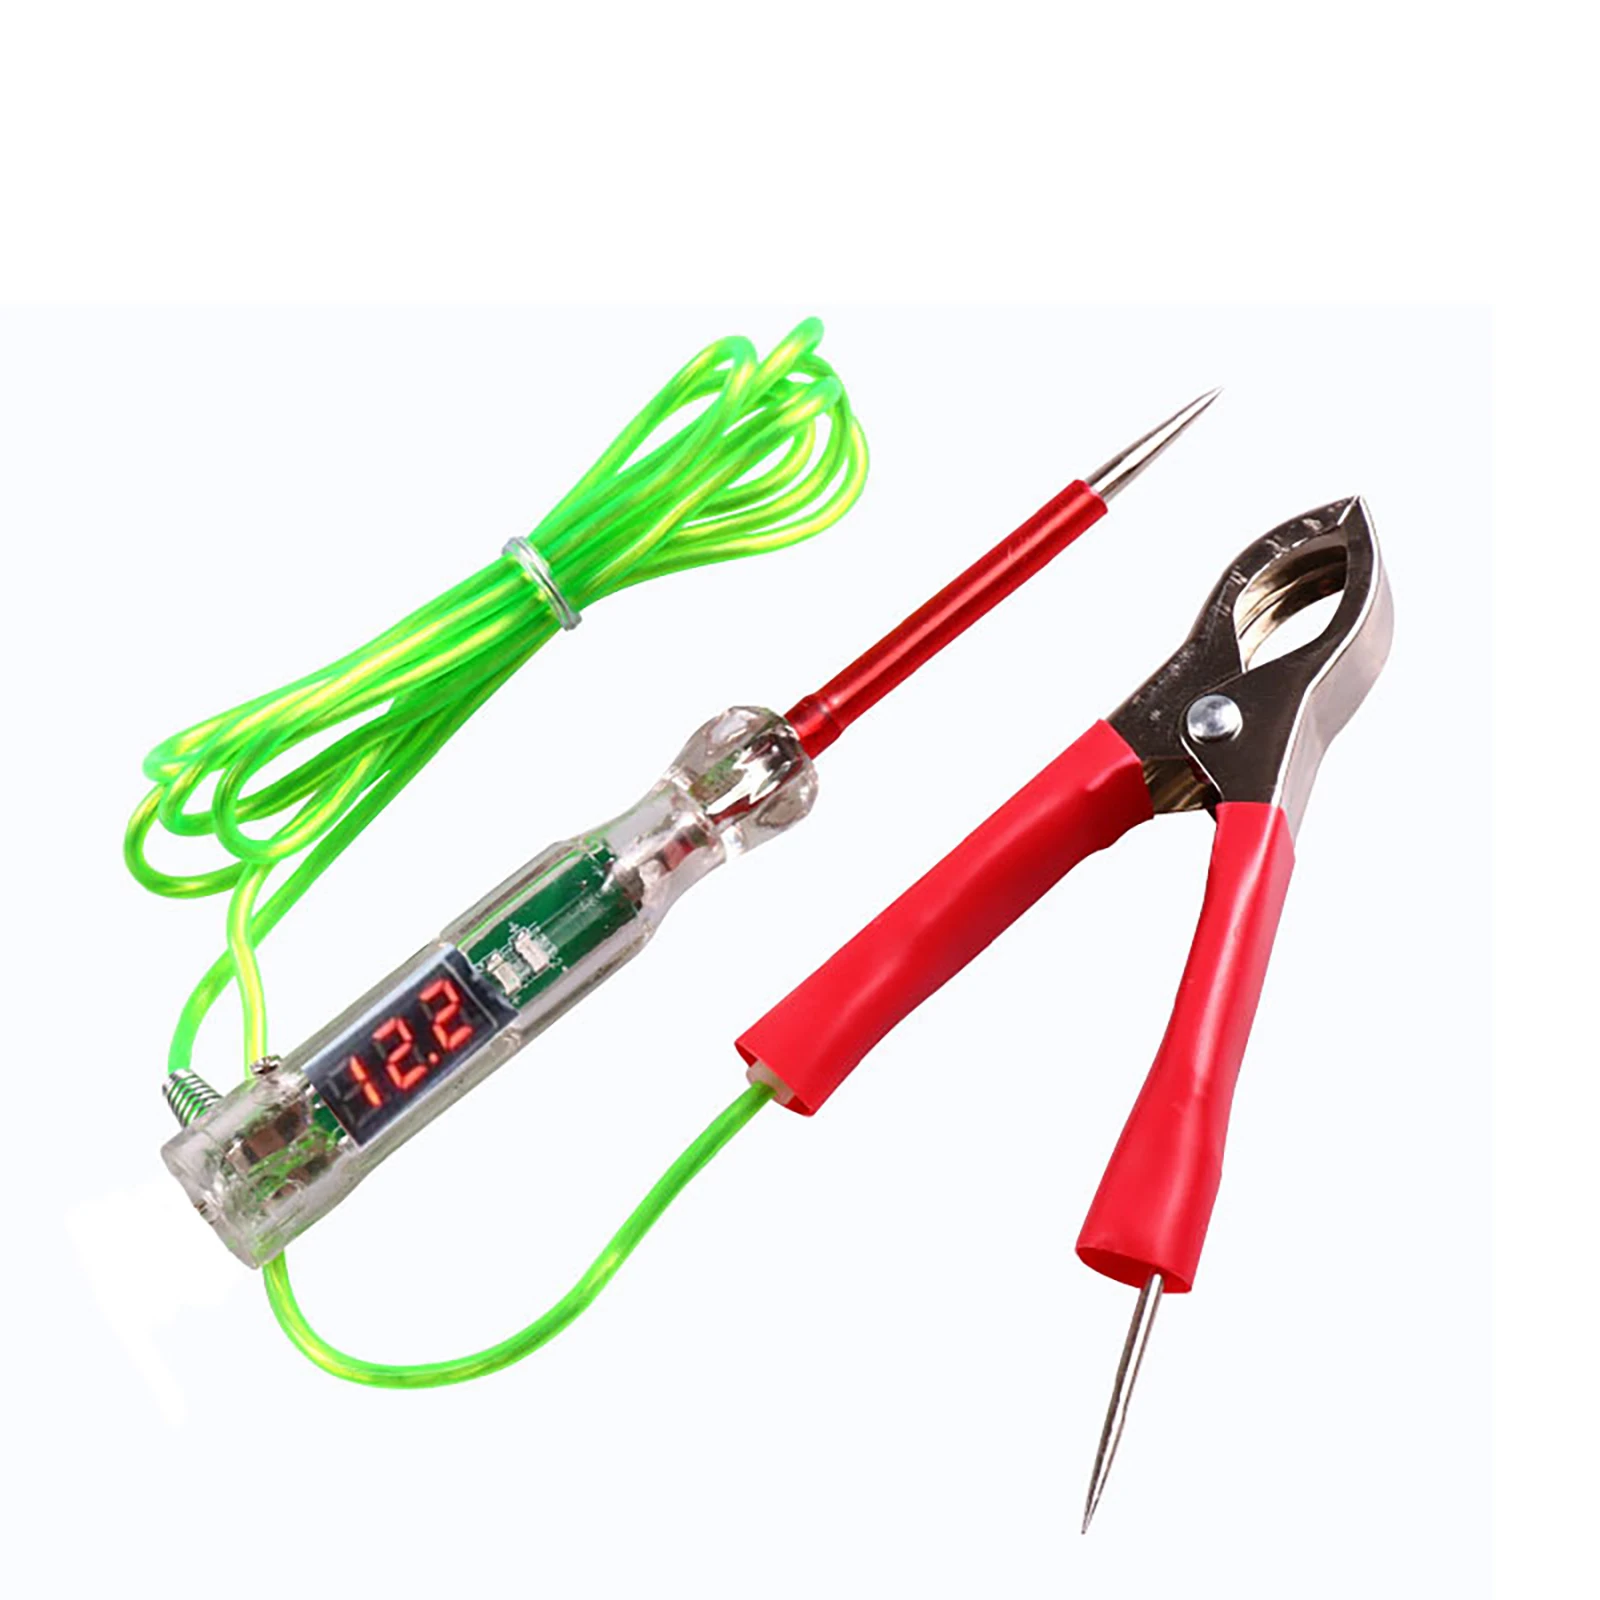 Diagnostic Tools DC 3-48V Four-in-One Auto Car Light Circuit Tester Lamp Voltage Test Pen Detector Probe Light System Test tools